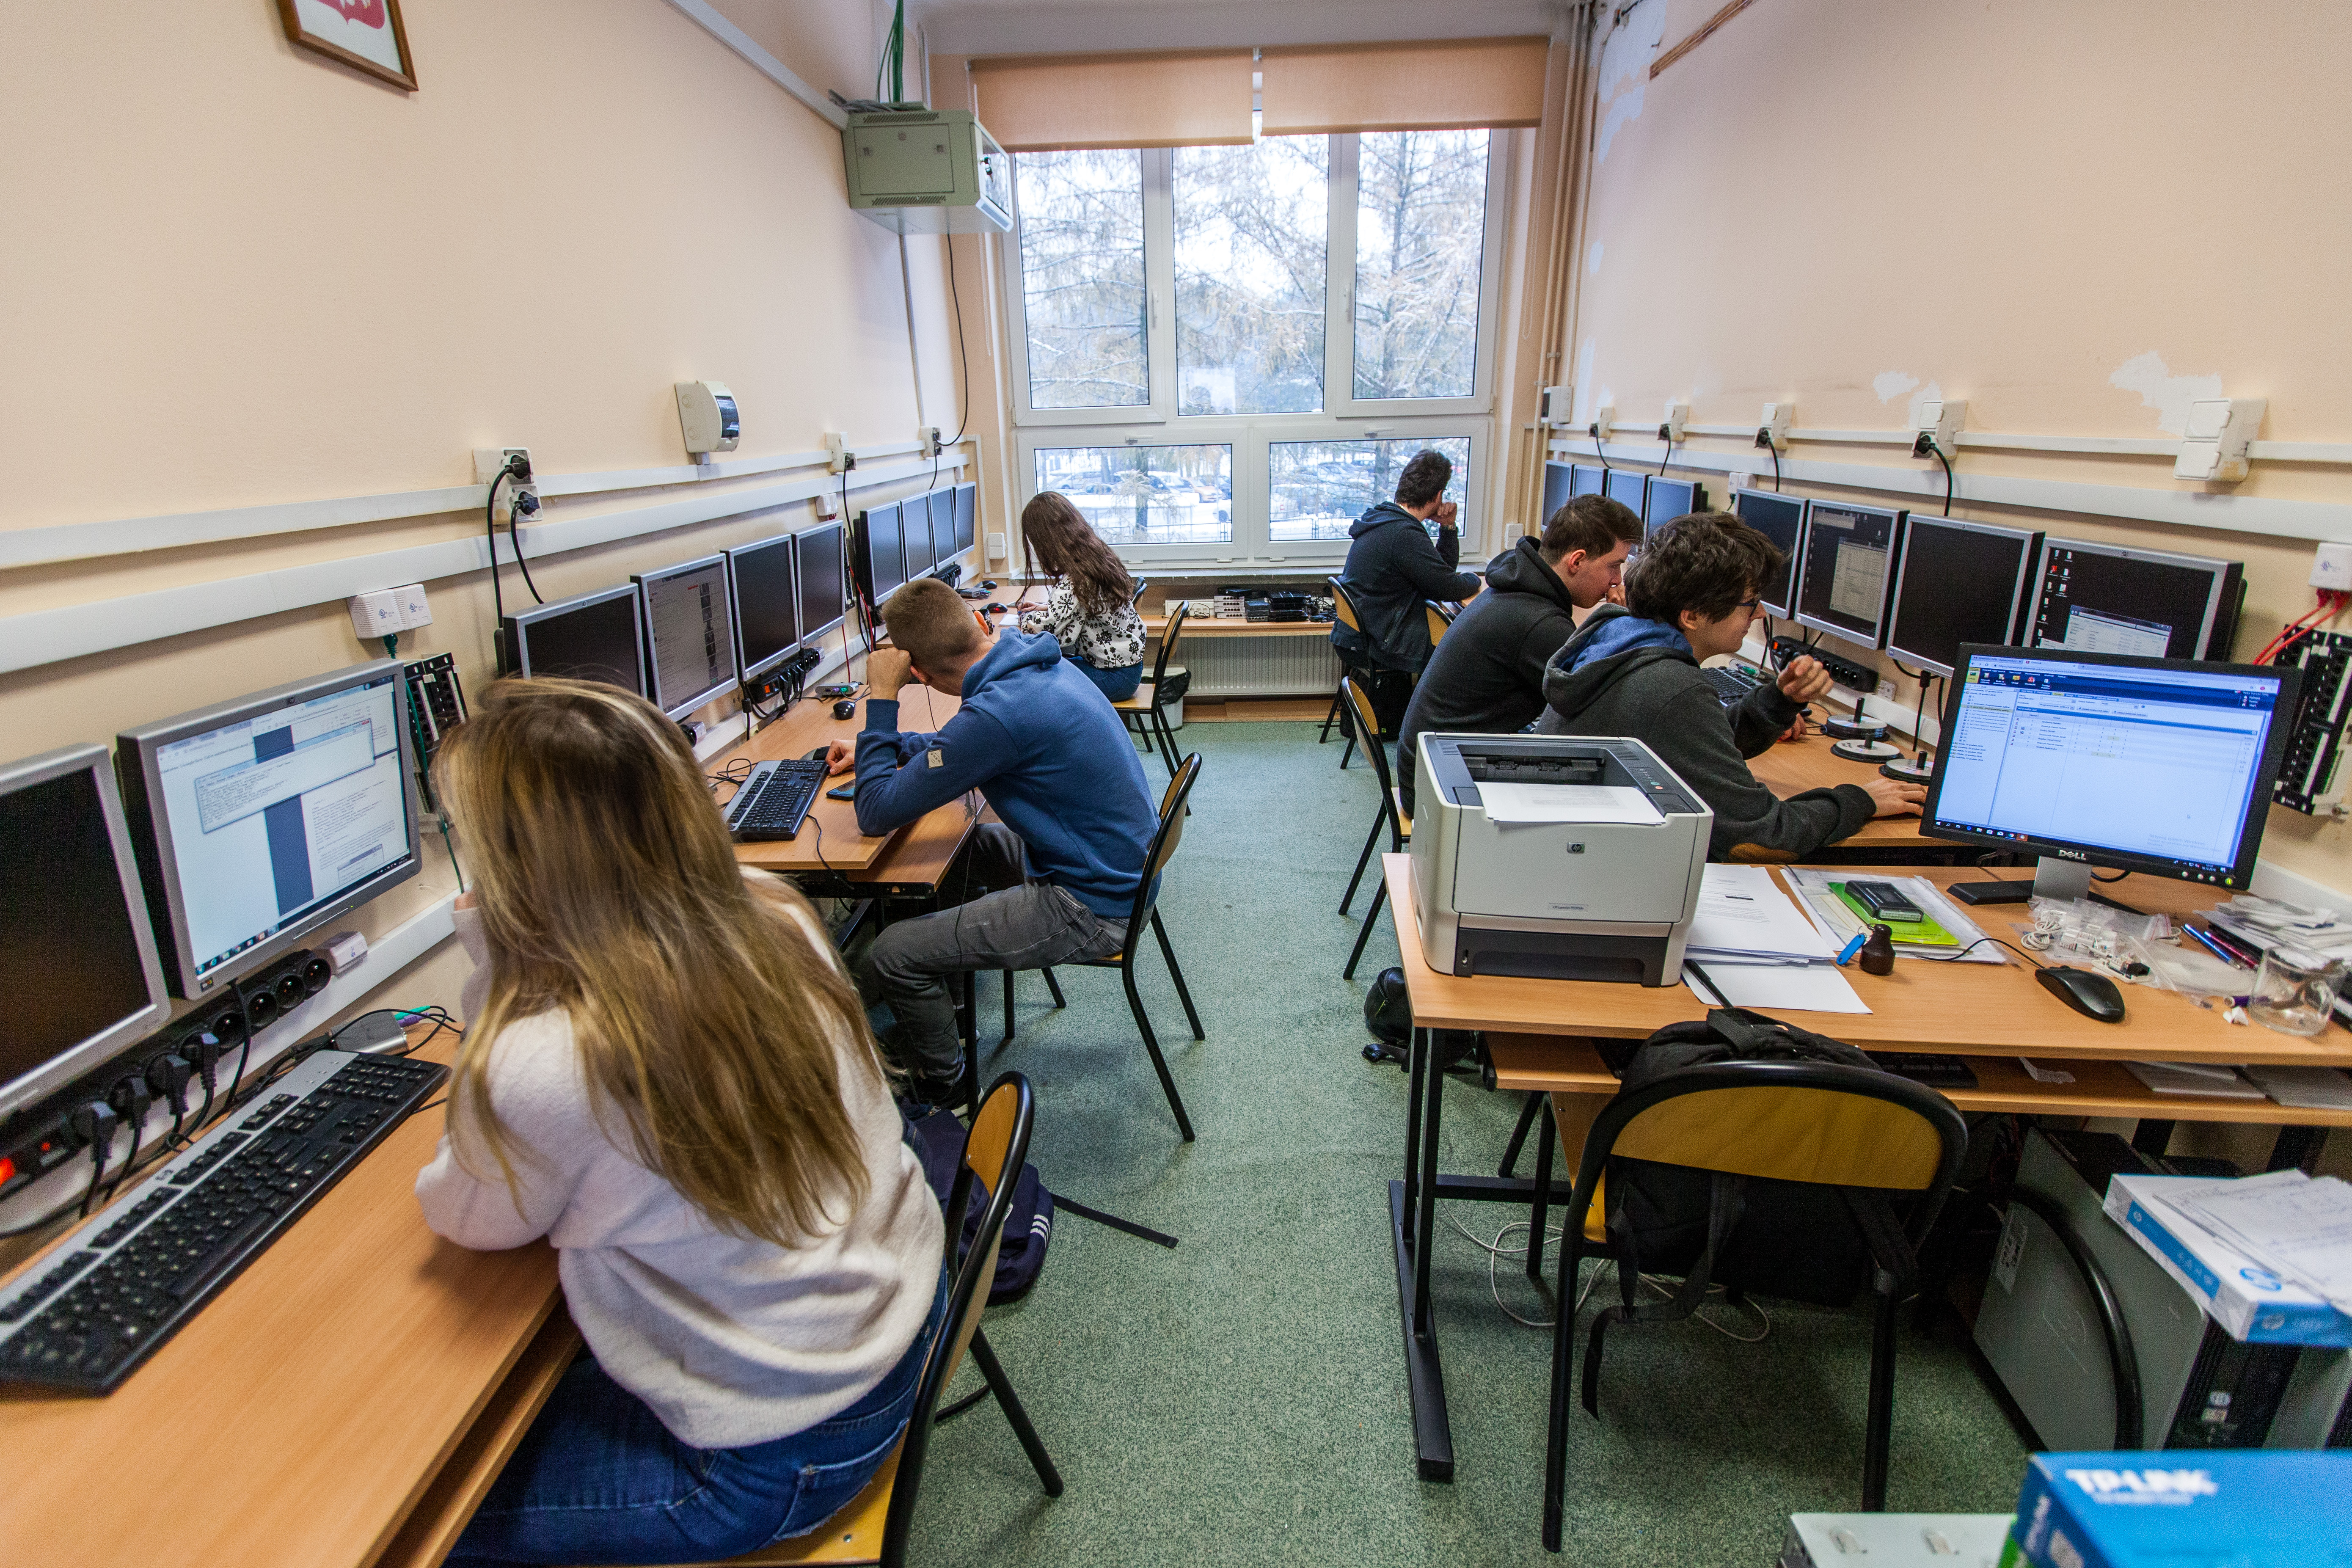 Group of students in a computer laboratory (ICT computer education).